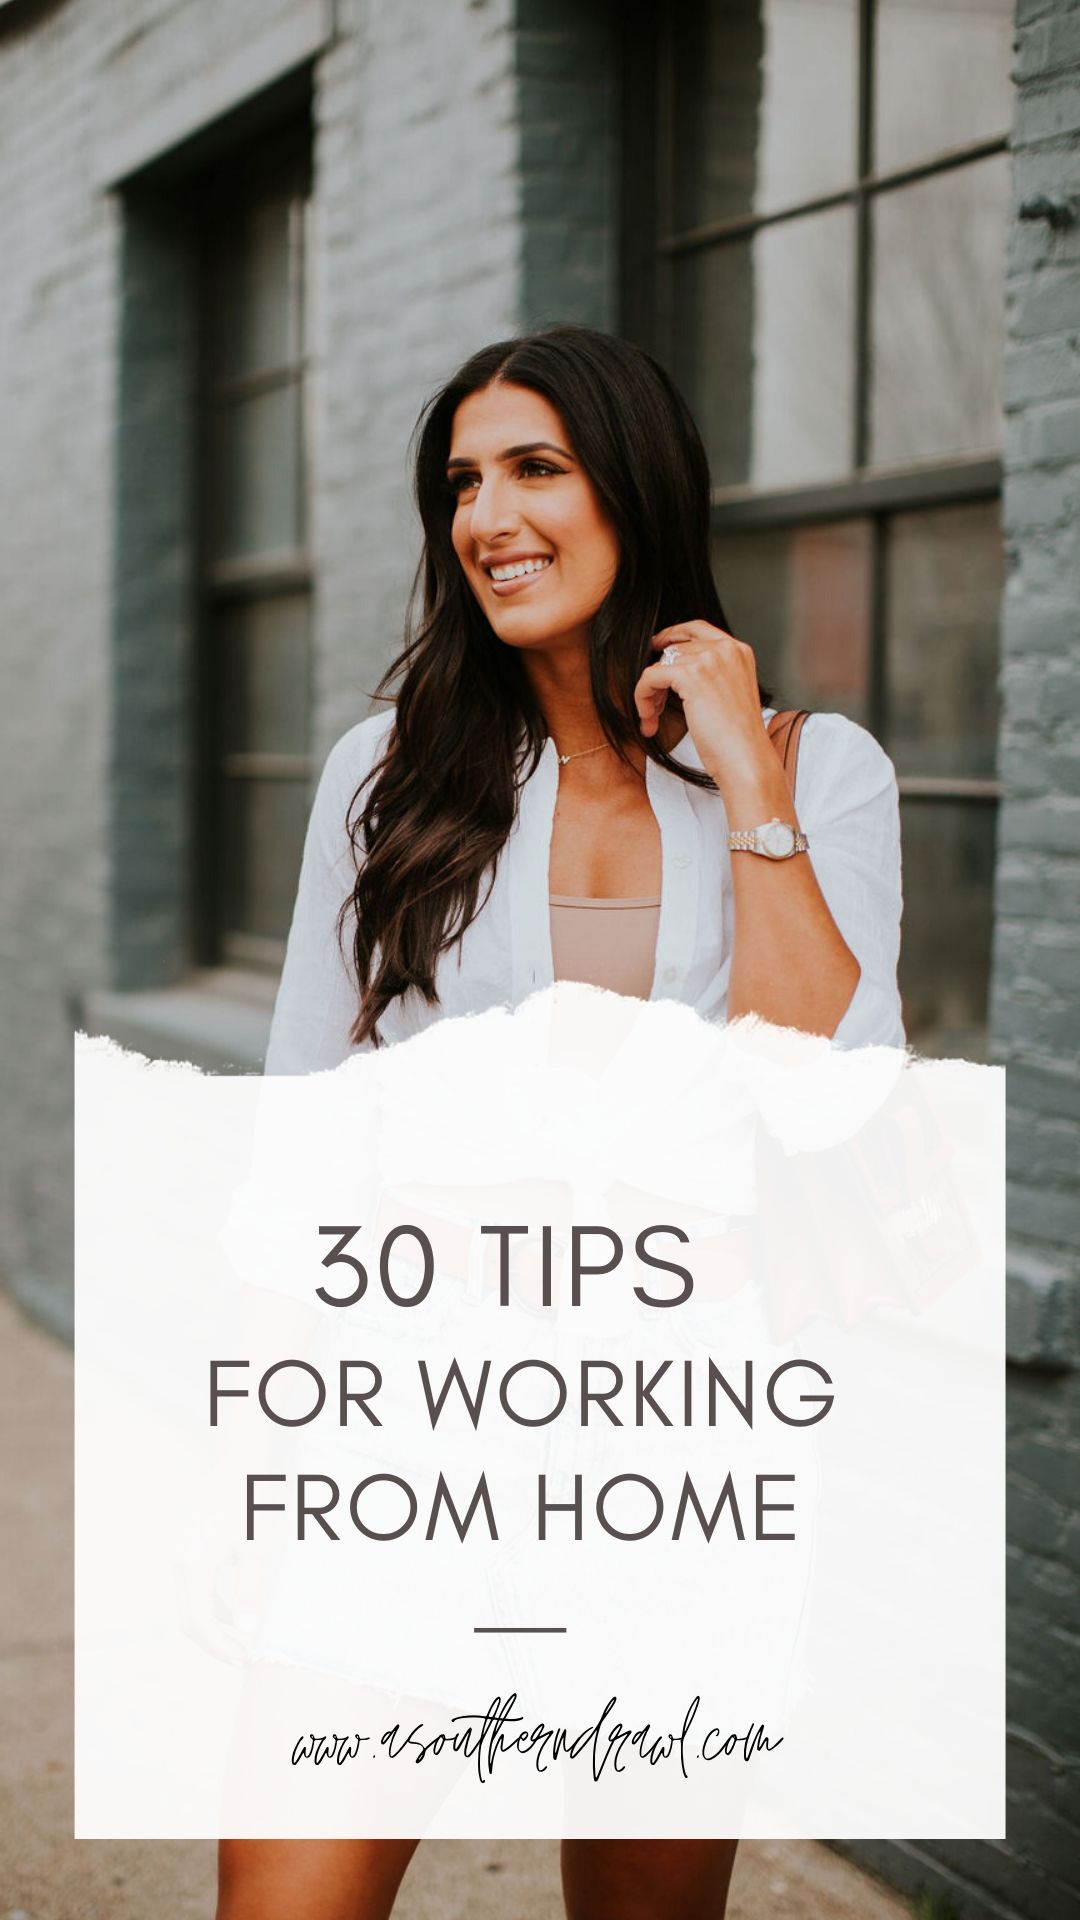 30 tips for working from home, working from home tips, working from home productivity tips, how to work from home, social distancing work tips, social distancing tips, how to work from your house, louis vuitton dauphine purse, acid wash denim, denim skirt, tank bodysuit, golden goose dupes, golden goose sneaker dupes, star sneakers // grace white a southern drawl